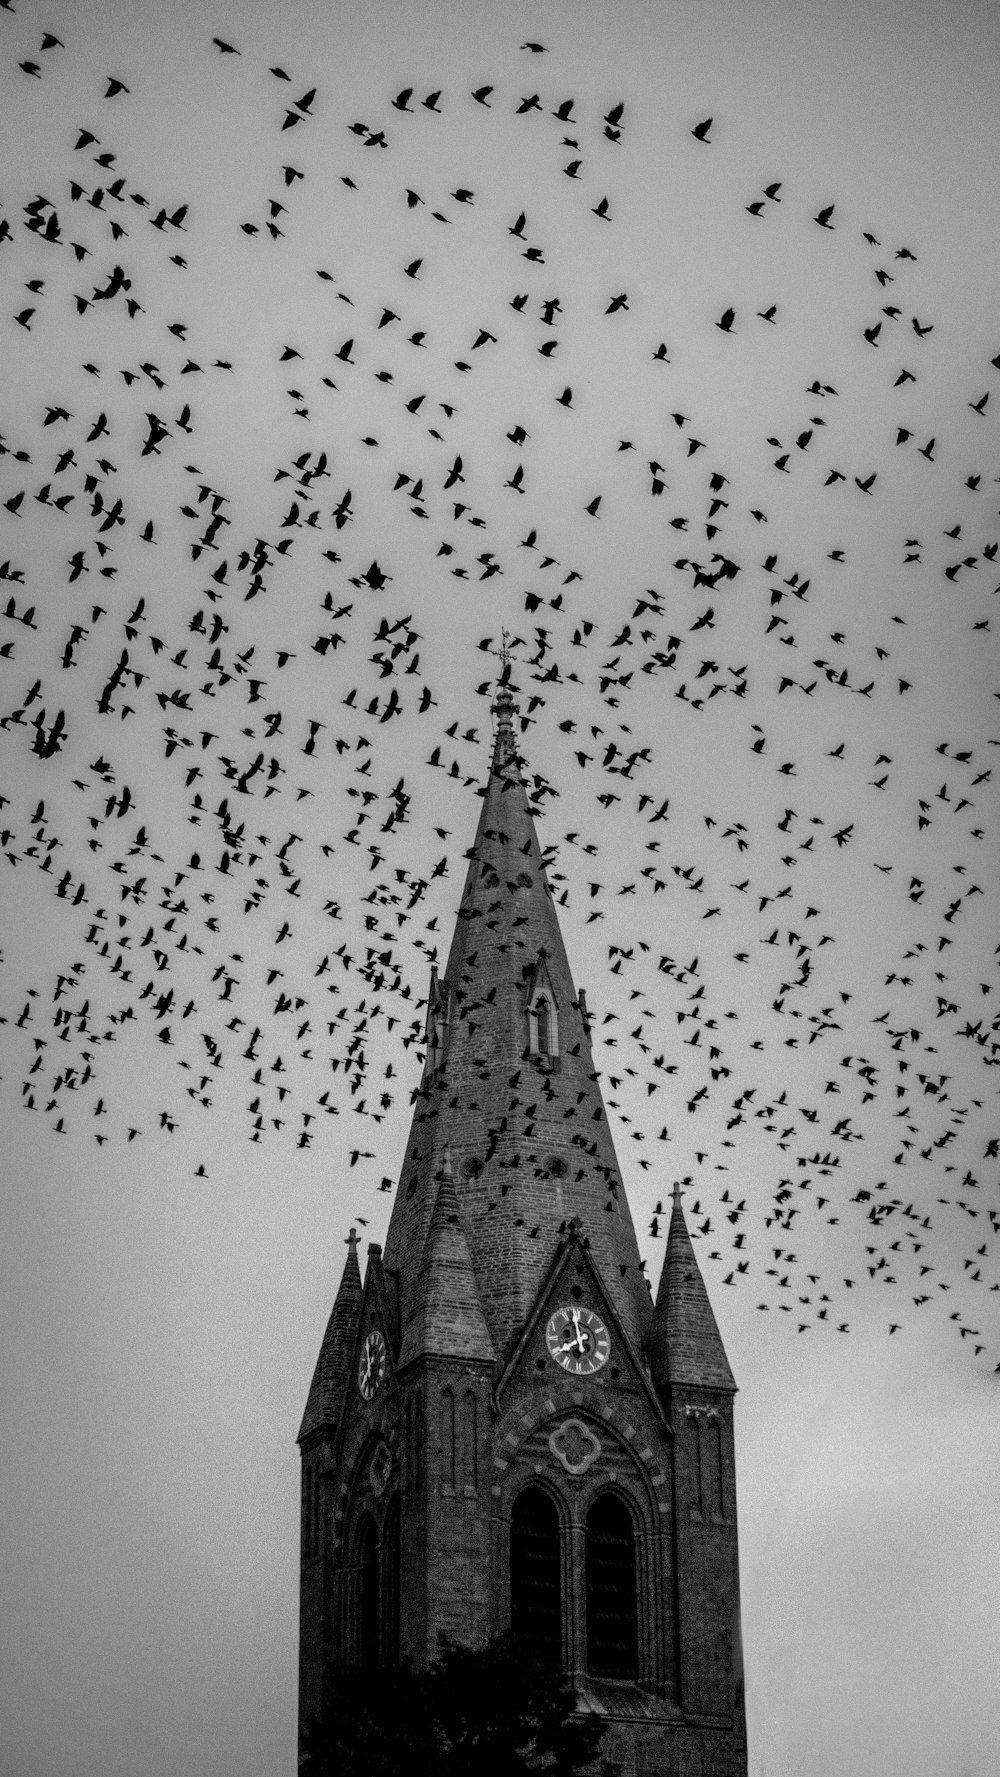 grayscale photo of cathedral under birds